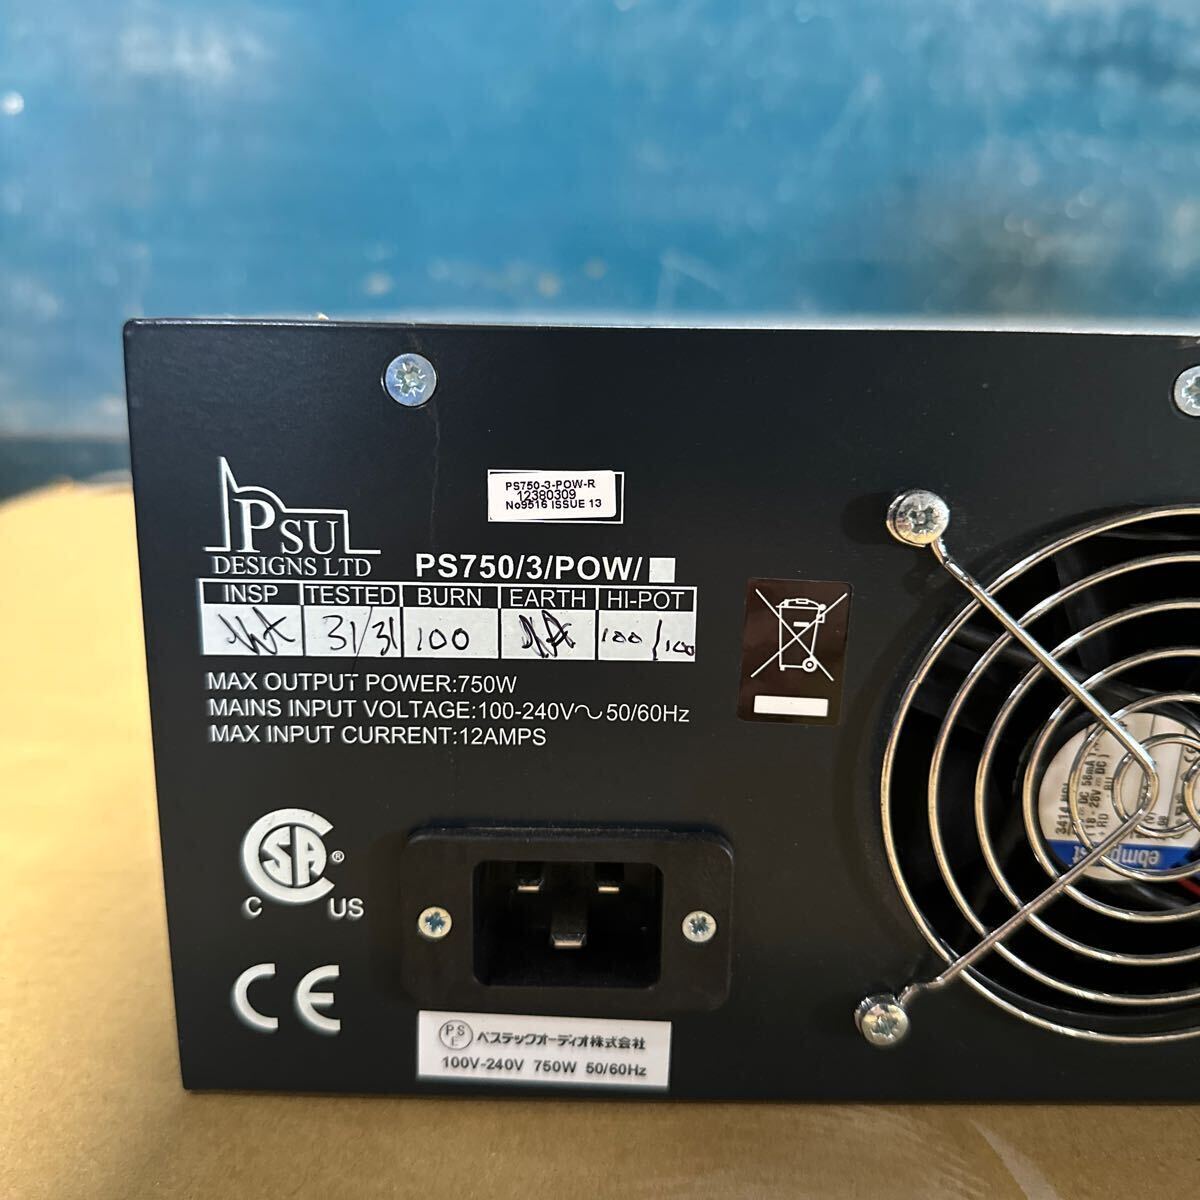 PCN98-1698 super-discount MIDAS Heritage series PSU PS750/3/POW/ electrification not yet verification used present condition goods 